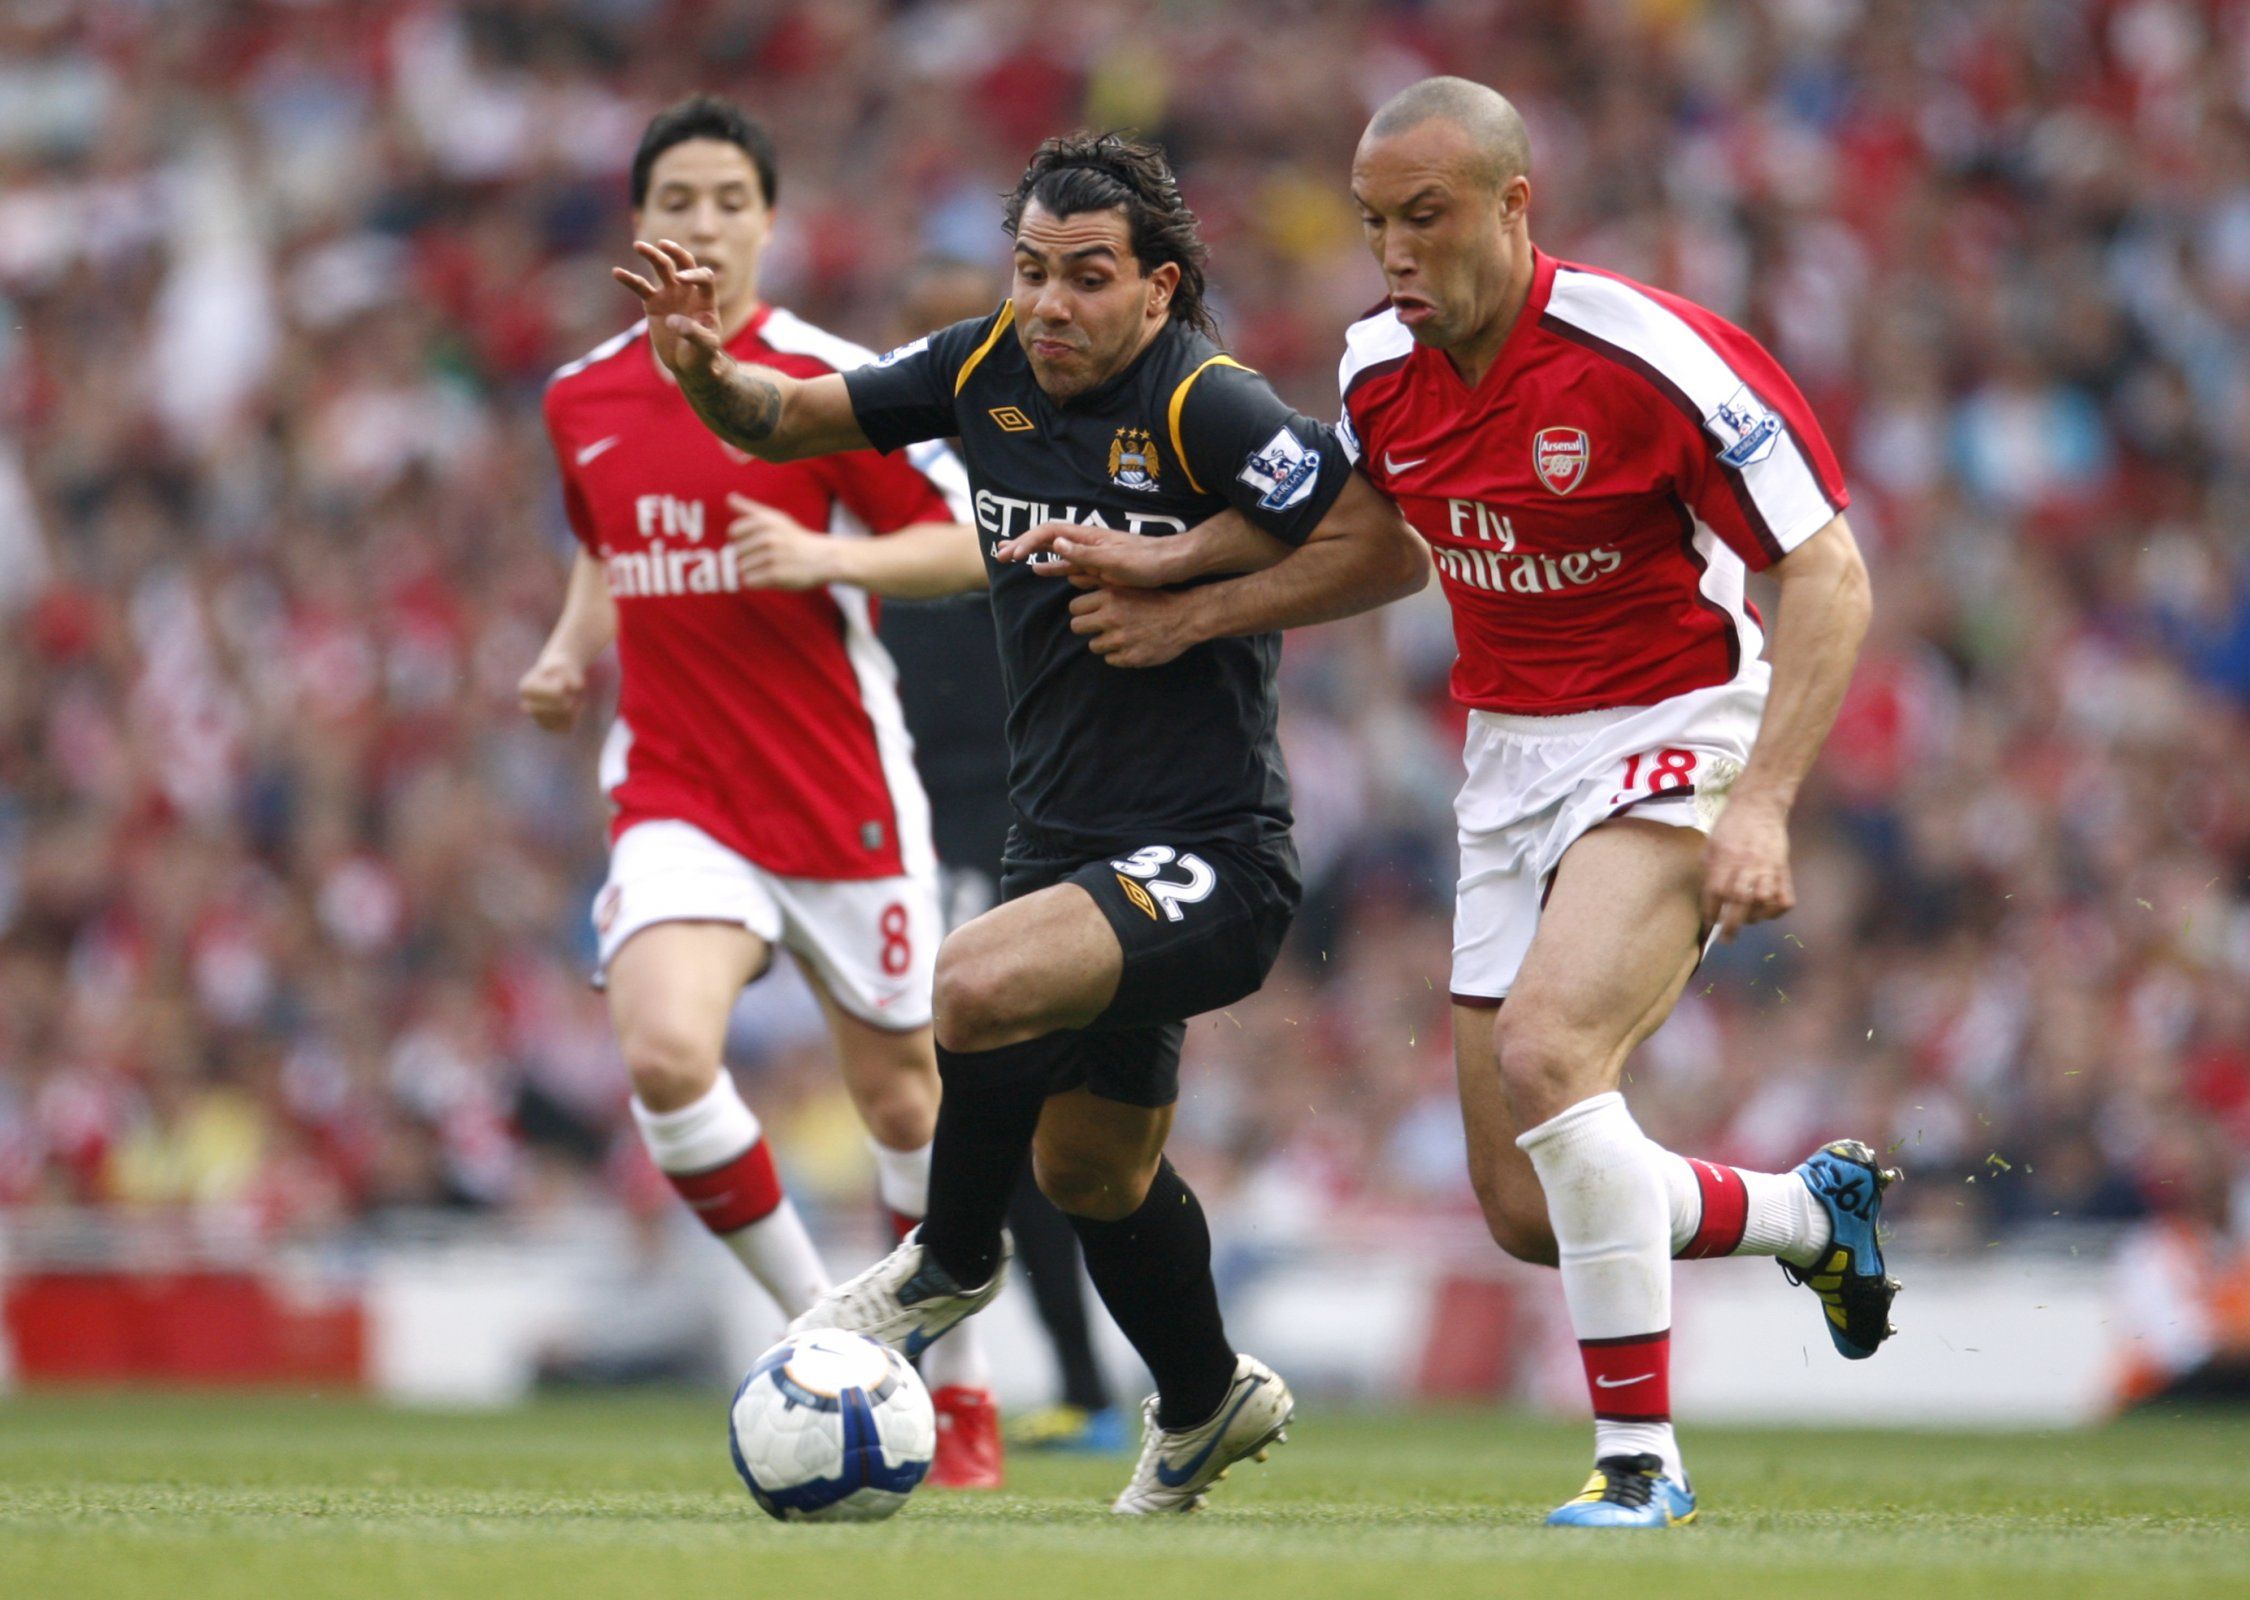 Mikael Silvestre for Arsenal